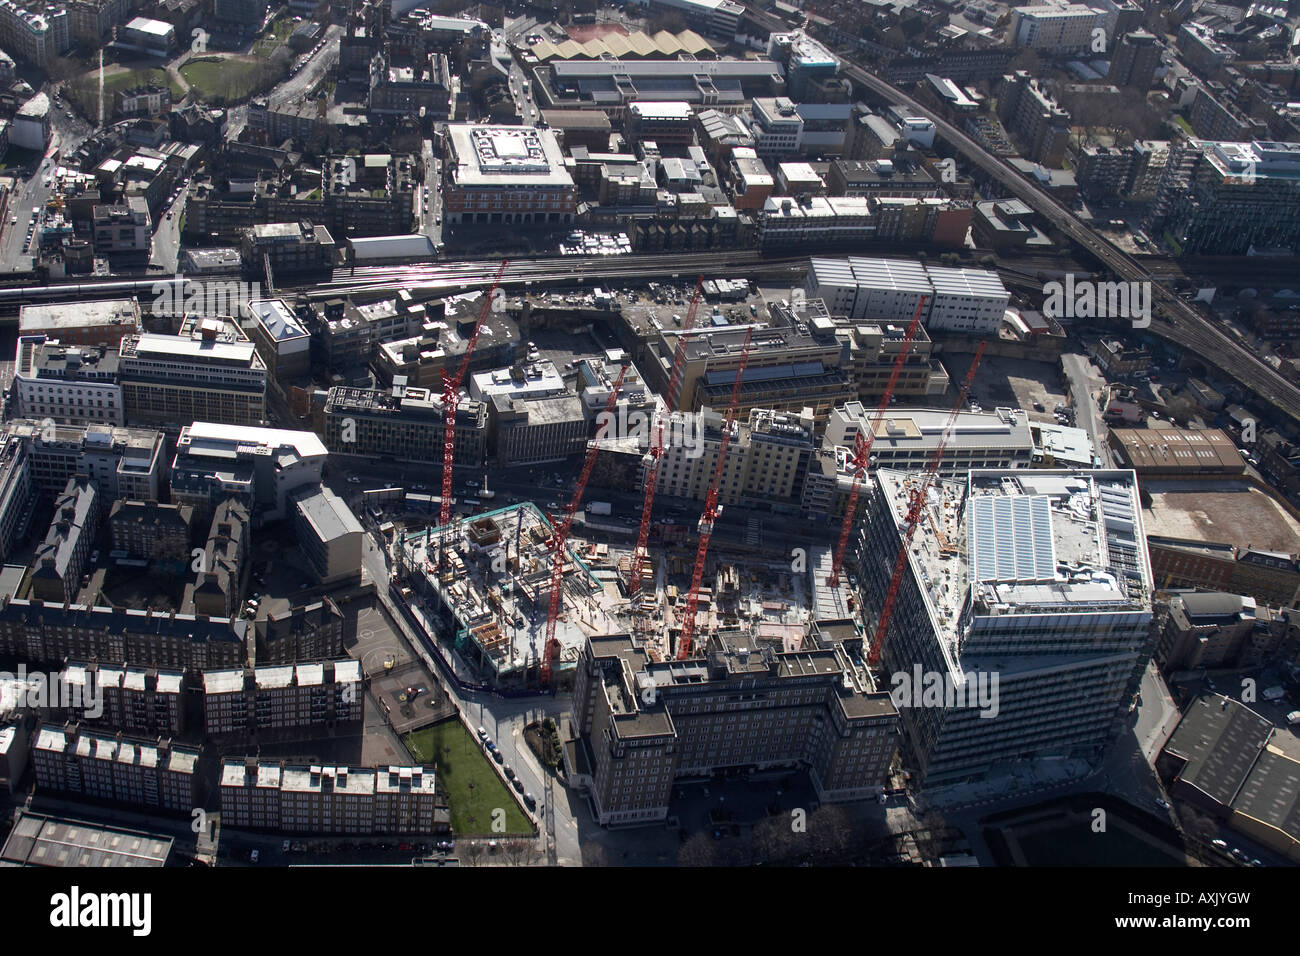 High level oblique aerial view south east of Southwark Street Stamford building construction site London SE1 England UK Feb 2006 Stock Photo